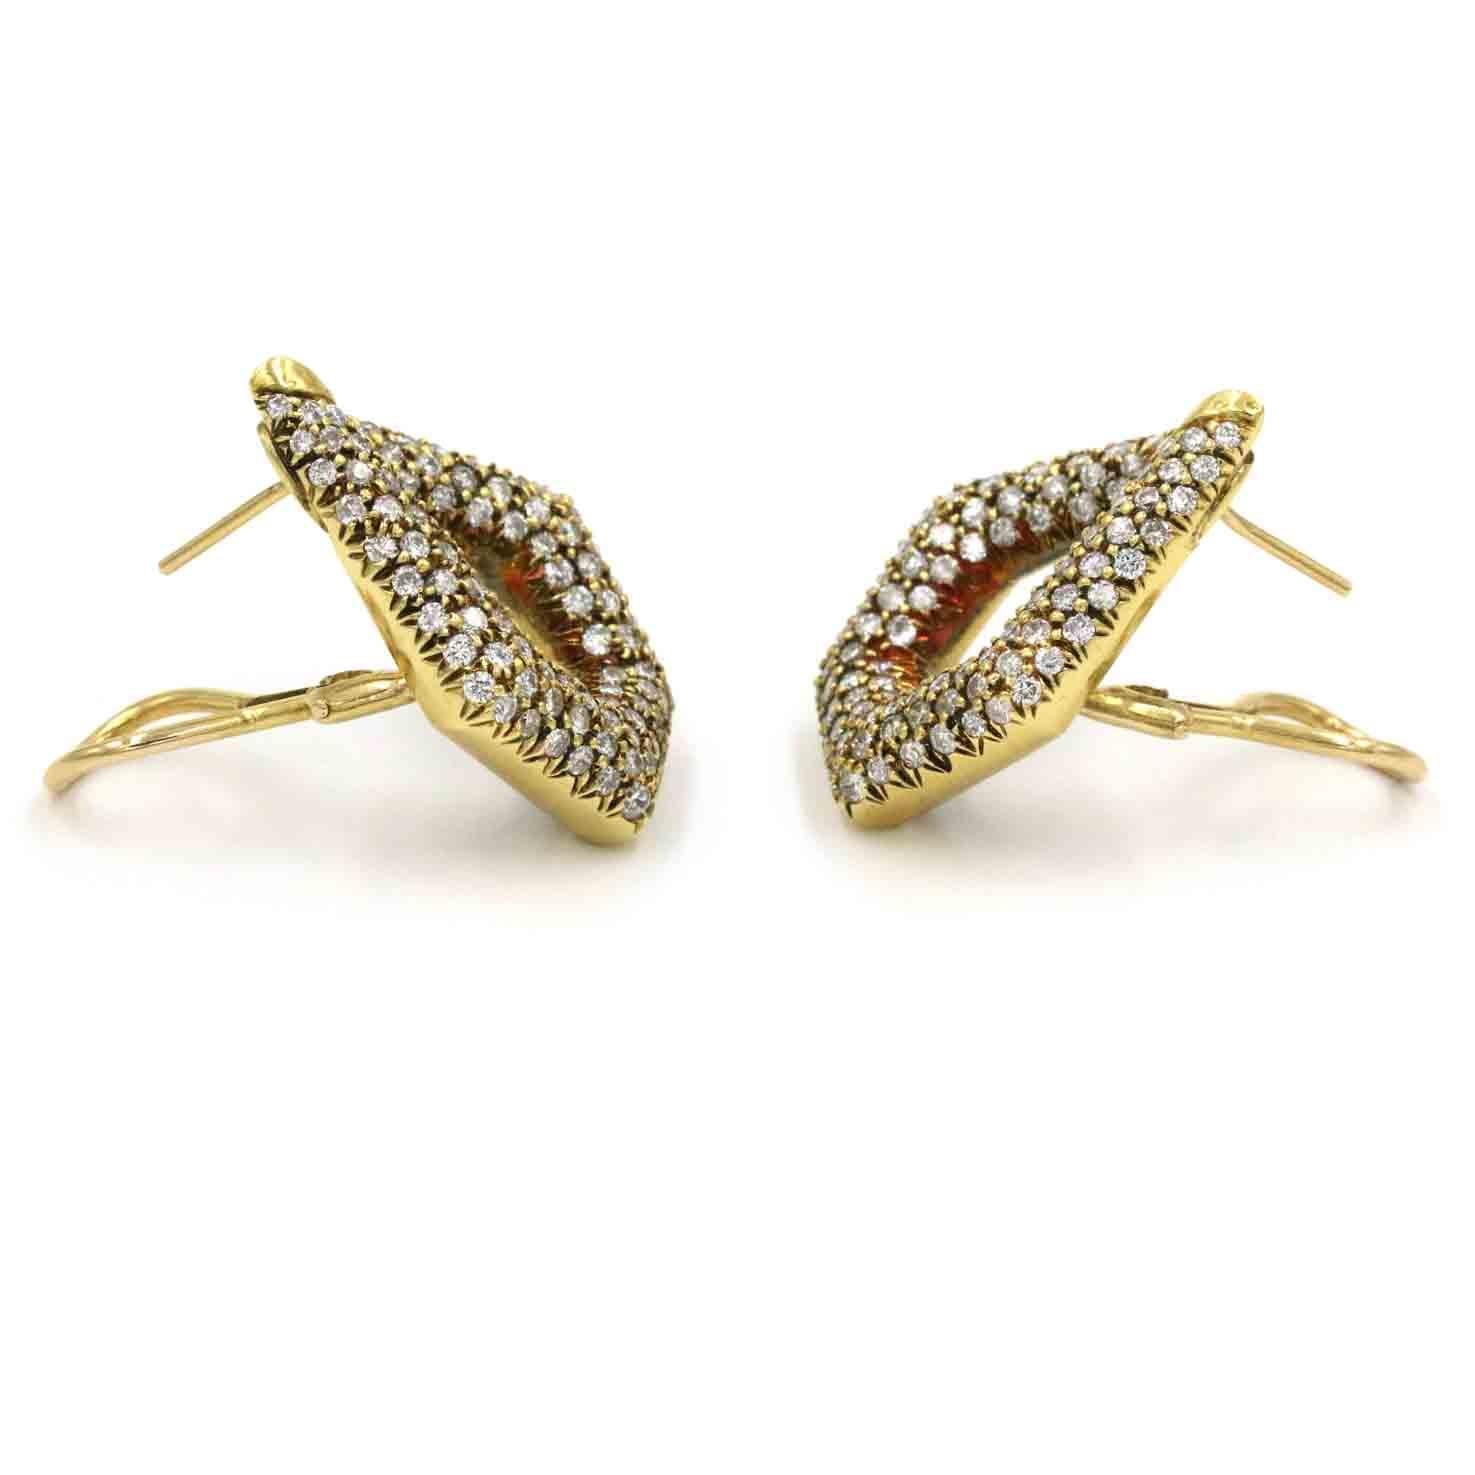 La Triumphe Pave Diamond Earrings with 4.0CTW of Diamonds in 18K Yellow Gold In Good Condition For Sale In Naples, FL